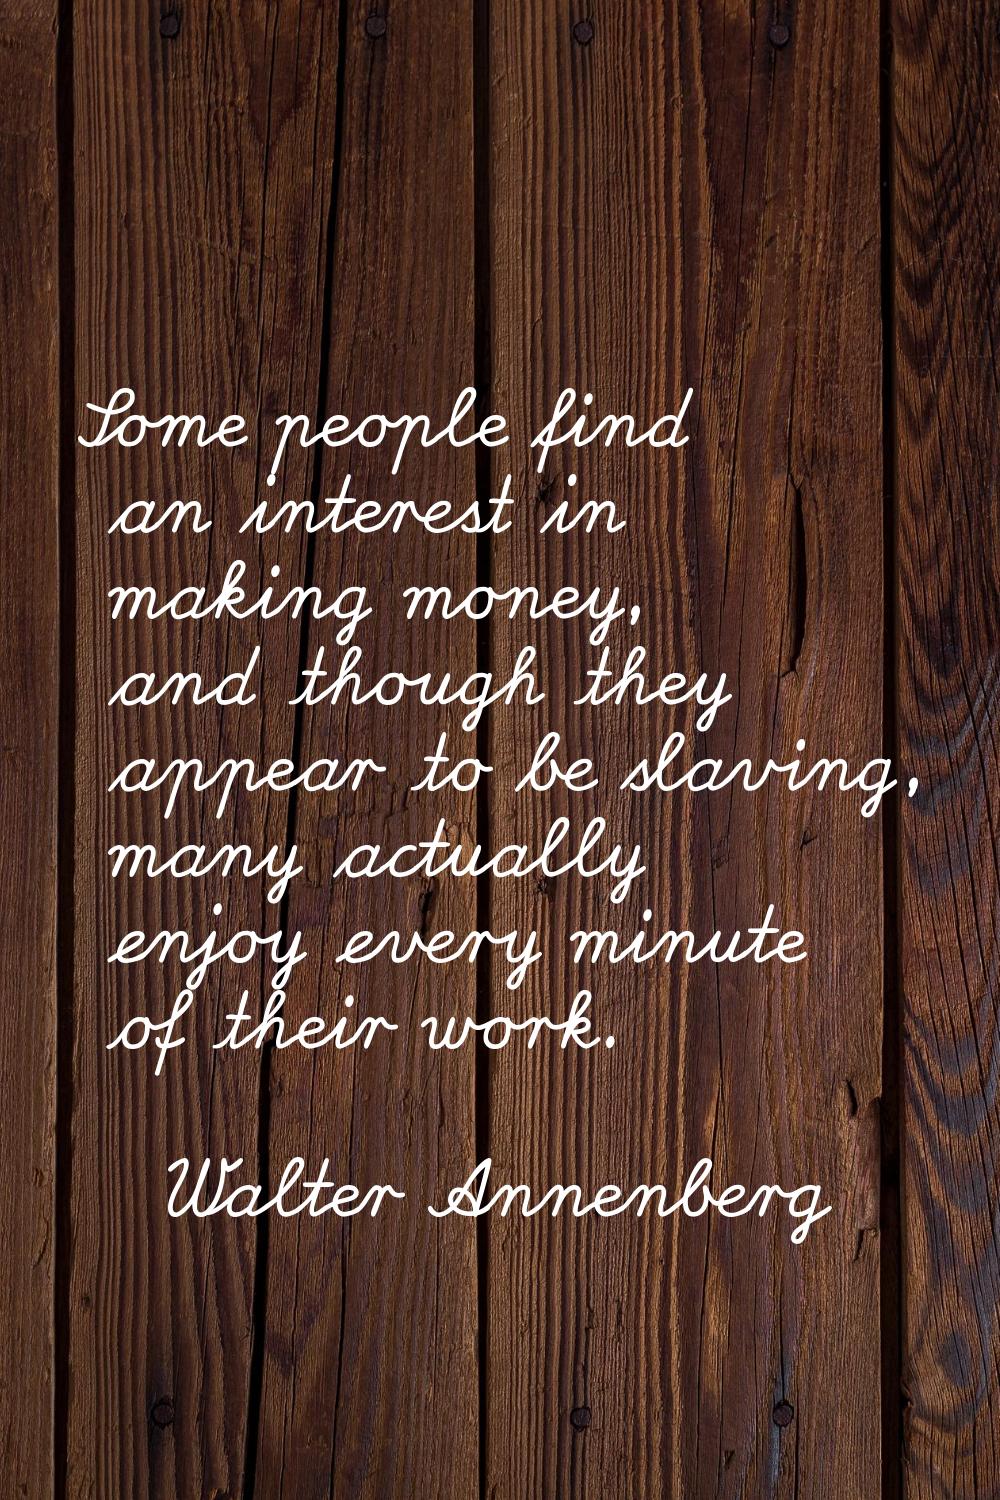 Some people find an interest in making money, and though they appear to be slaving, many actually e